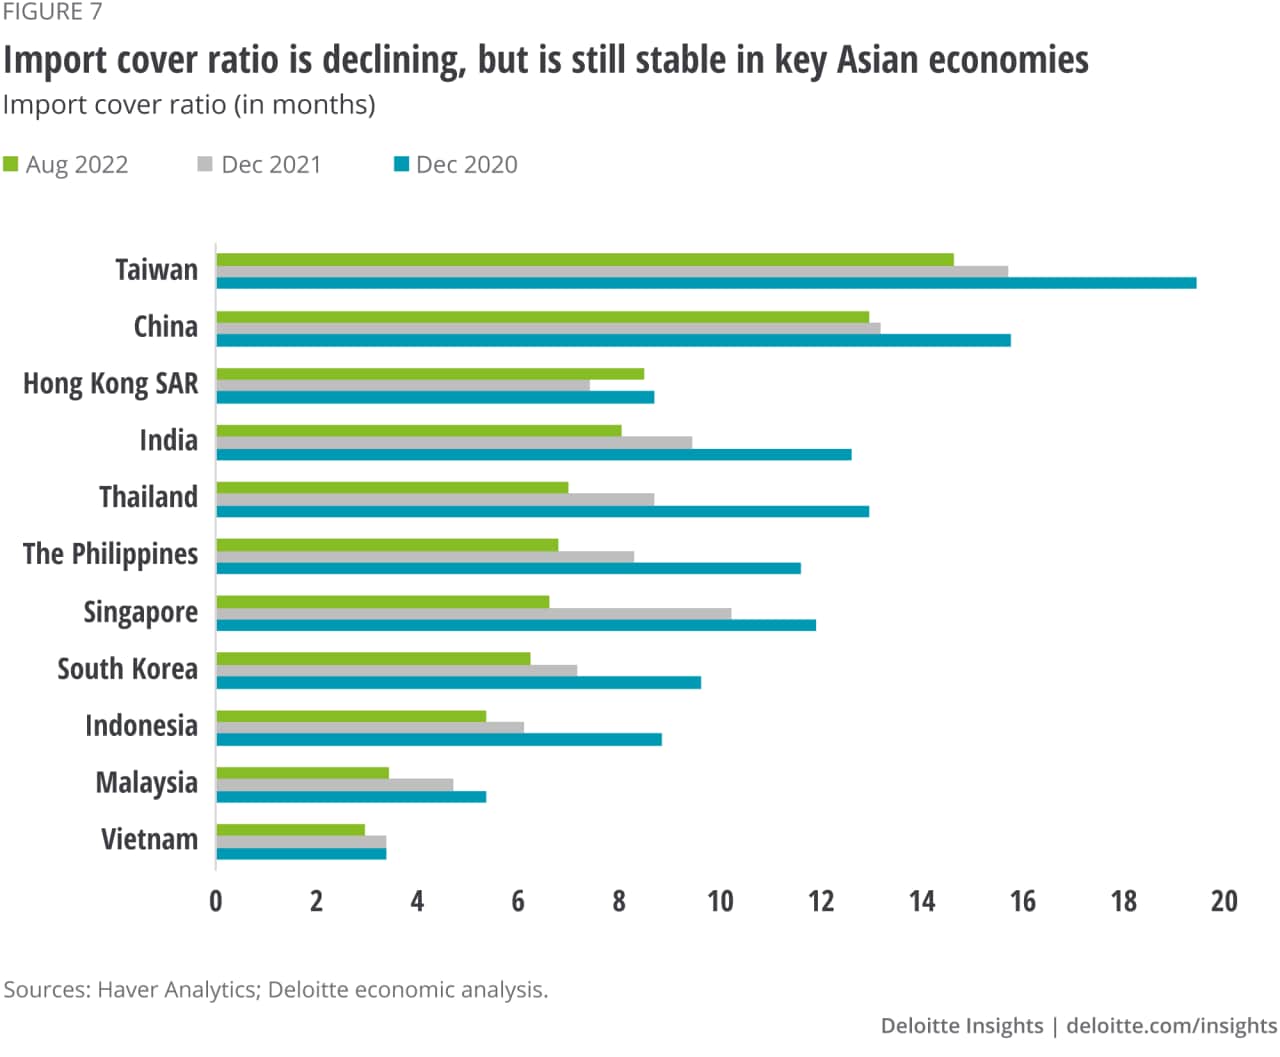 Figure 7. Import cover ratio is declining, but is still stable in key Asian economies